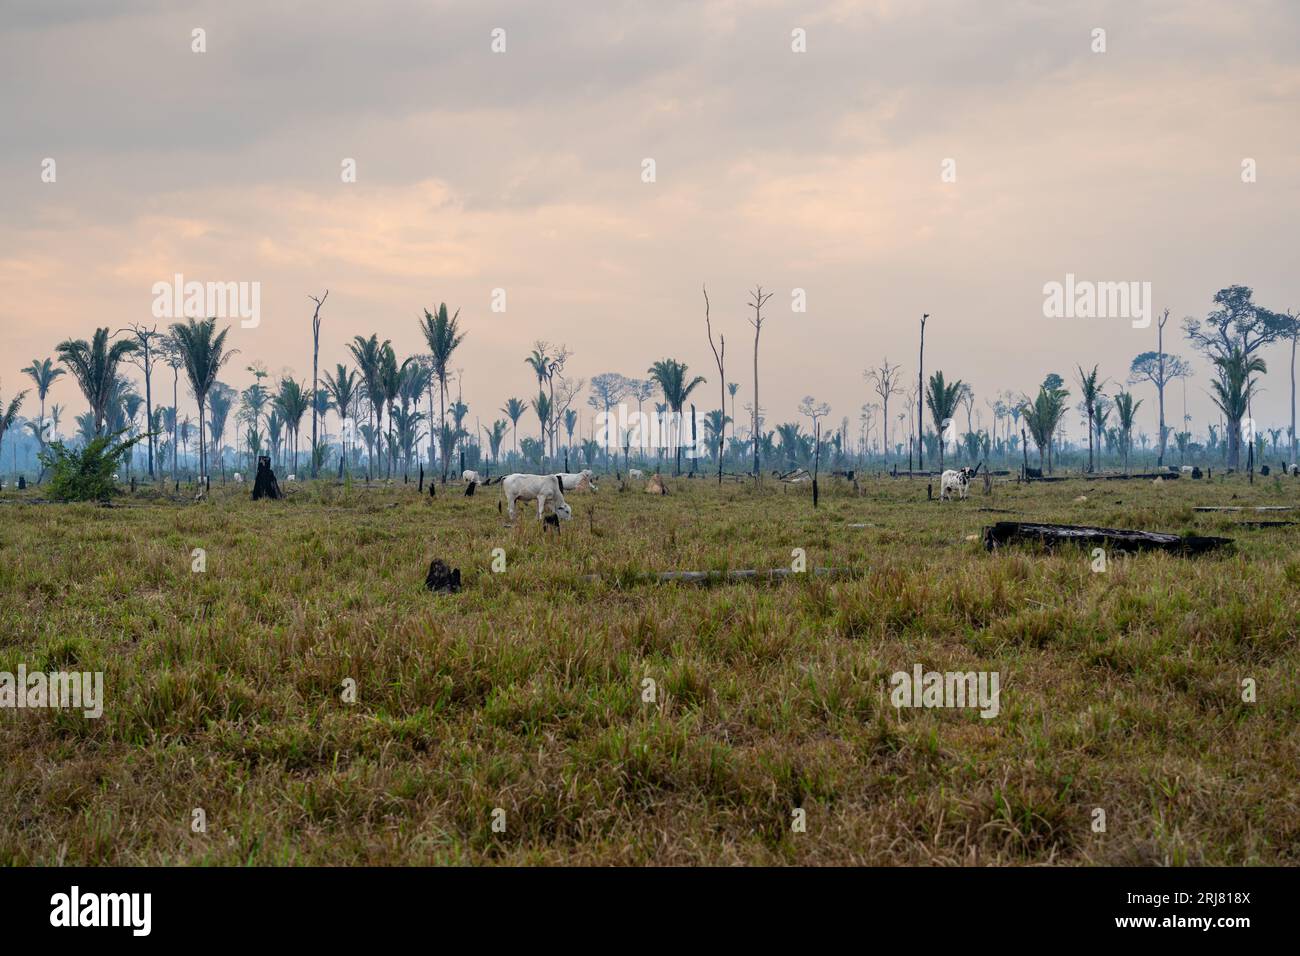 Cattle pasture and Amazon rainforest trees deforestation. Destroyed land in livestock farm. Amazonas, Brazil. Environment, ecology, global Warming. Stock Photo